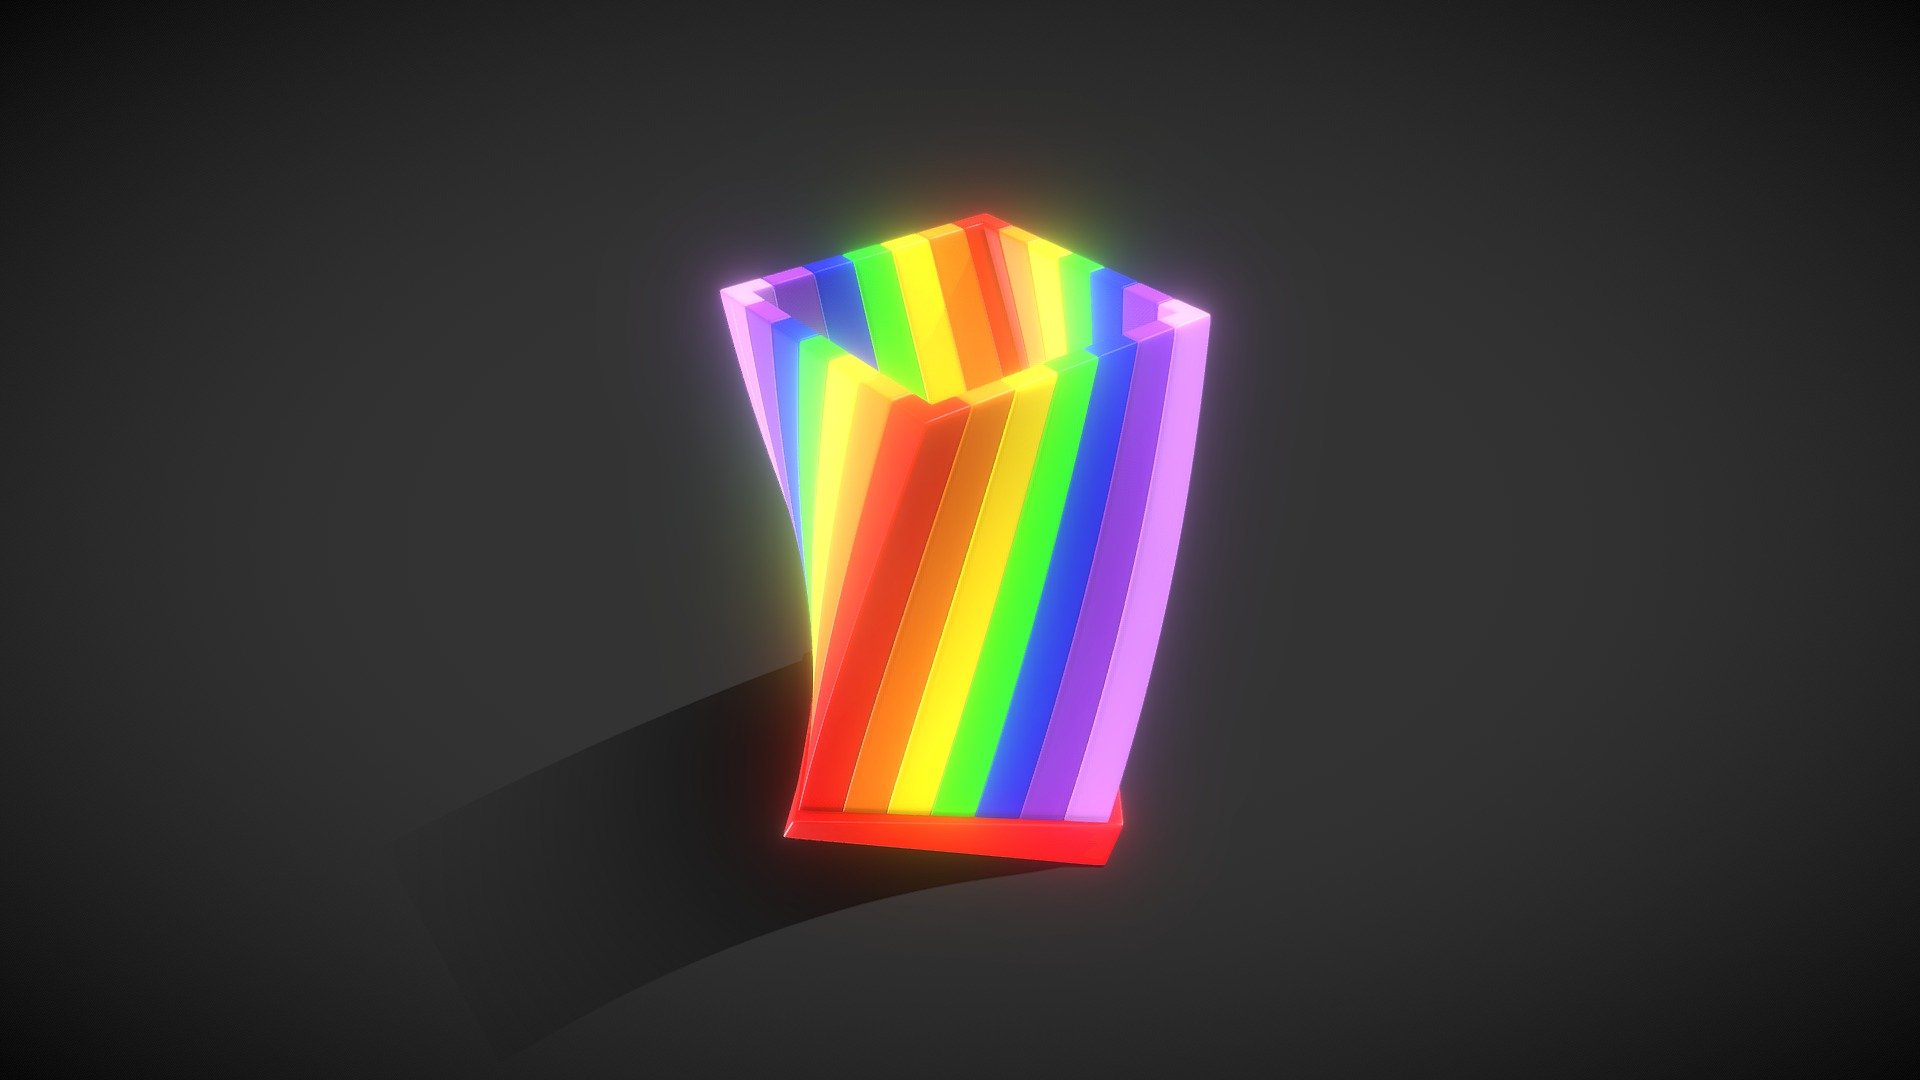 Rainbow Pencil Container made in Blender 2.82 and rendered in Cycles.

3D Printable Model.

Model Size:-
Length : 10 cm,
Width : 10 cm,
Height : 12 cm.

Statistics:-
Verts : 51994,
Faces : 51936,
Tris : 103872 3d model